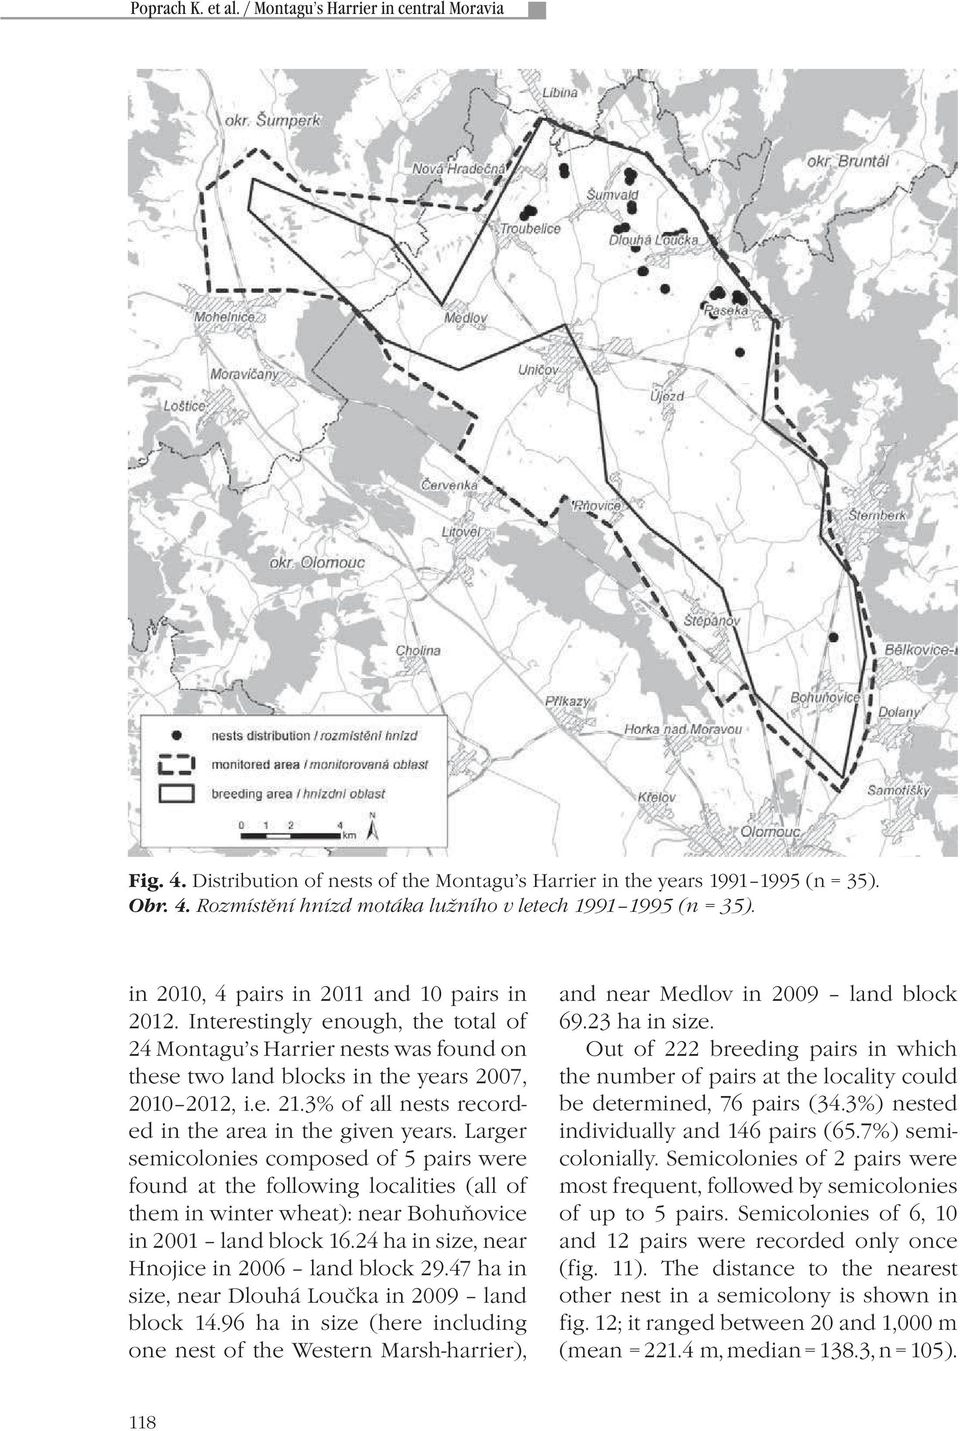 3% of all nests recorded in the area in the given years.